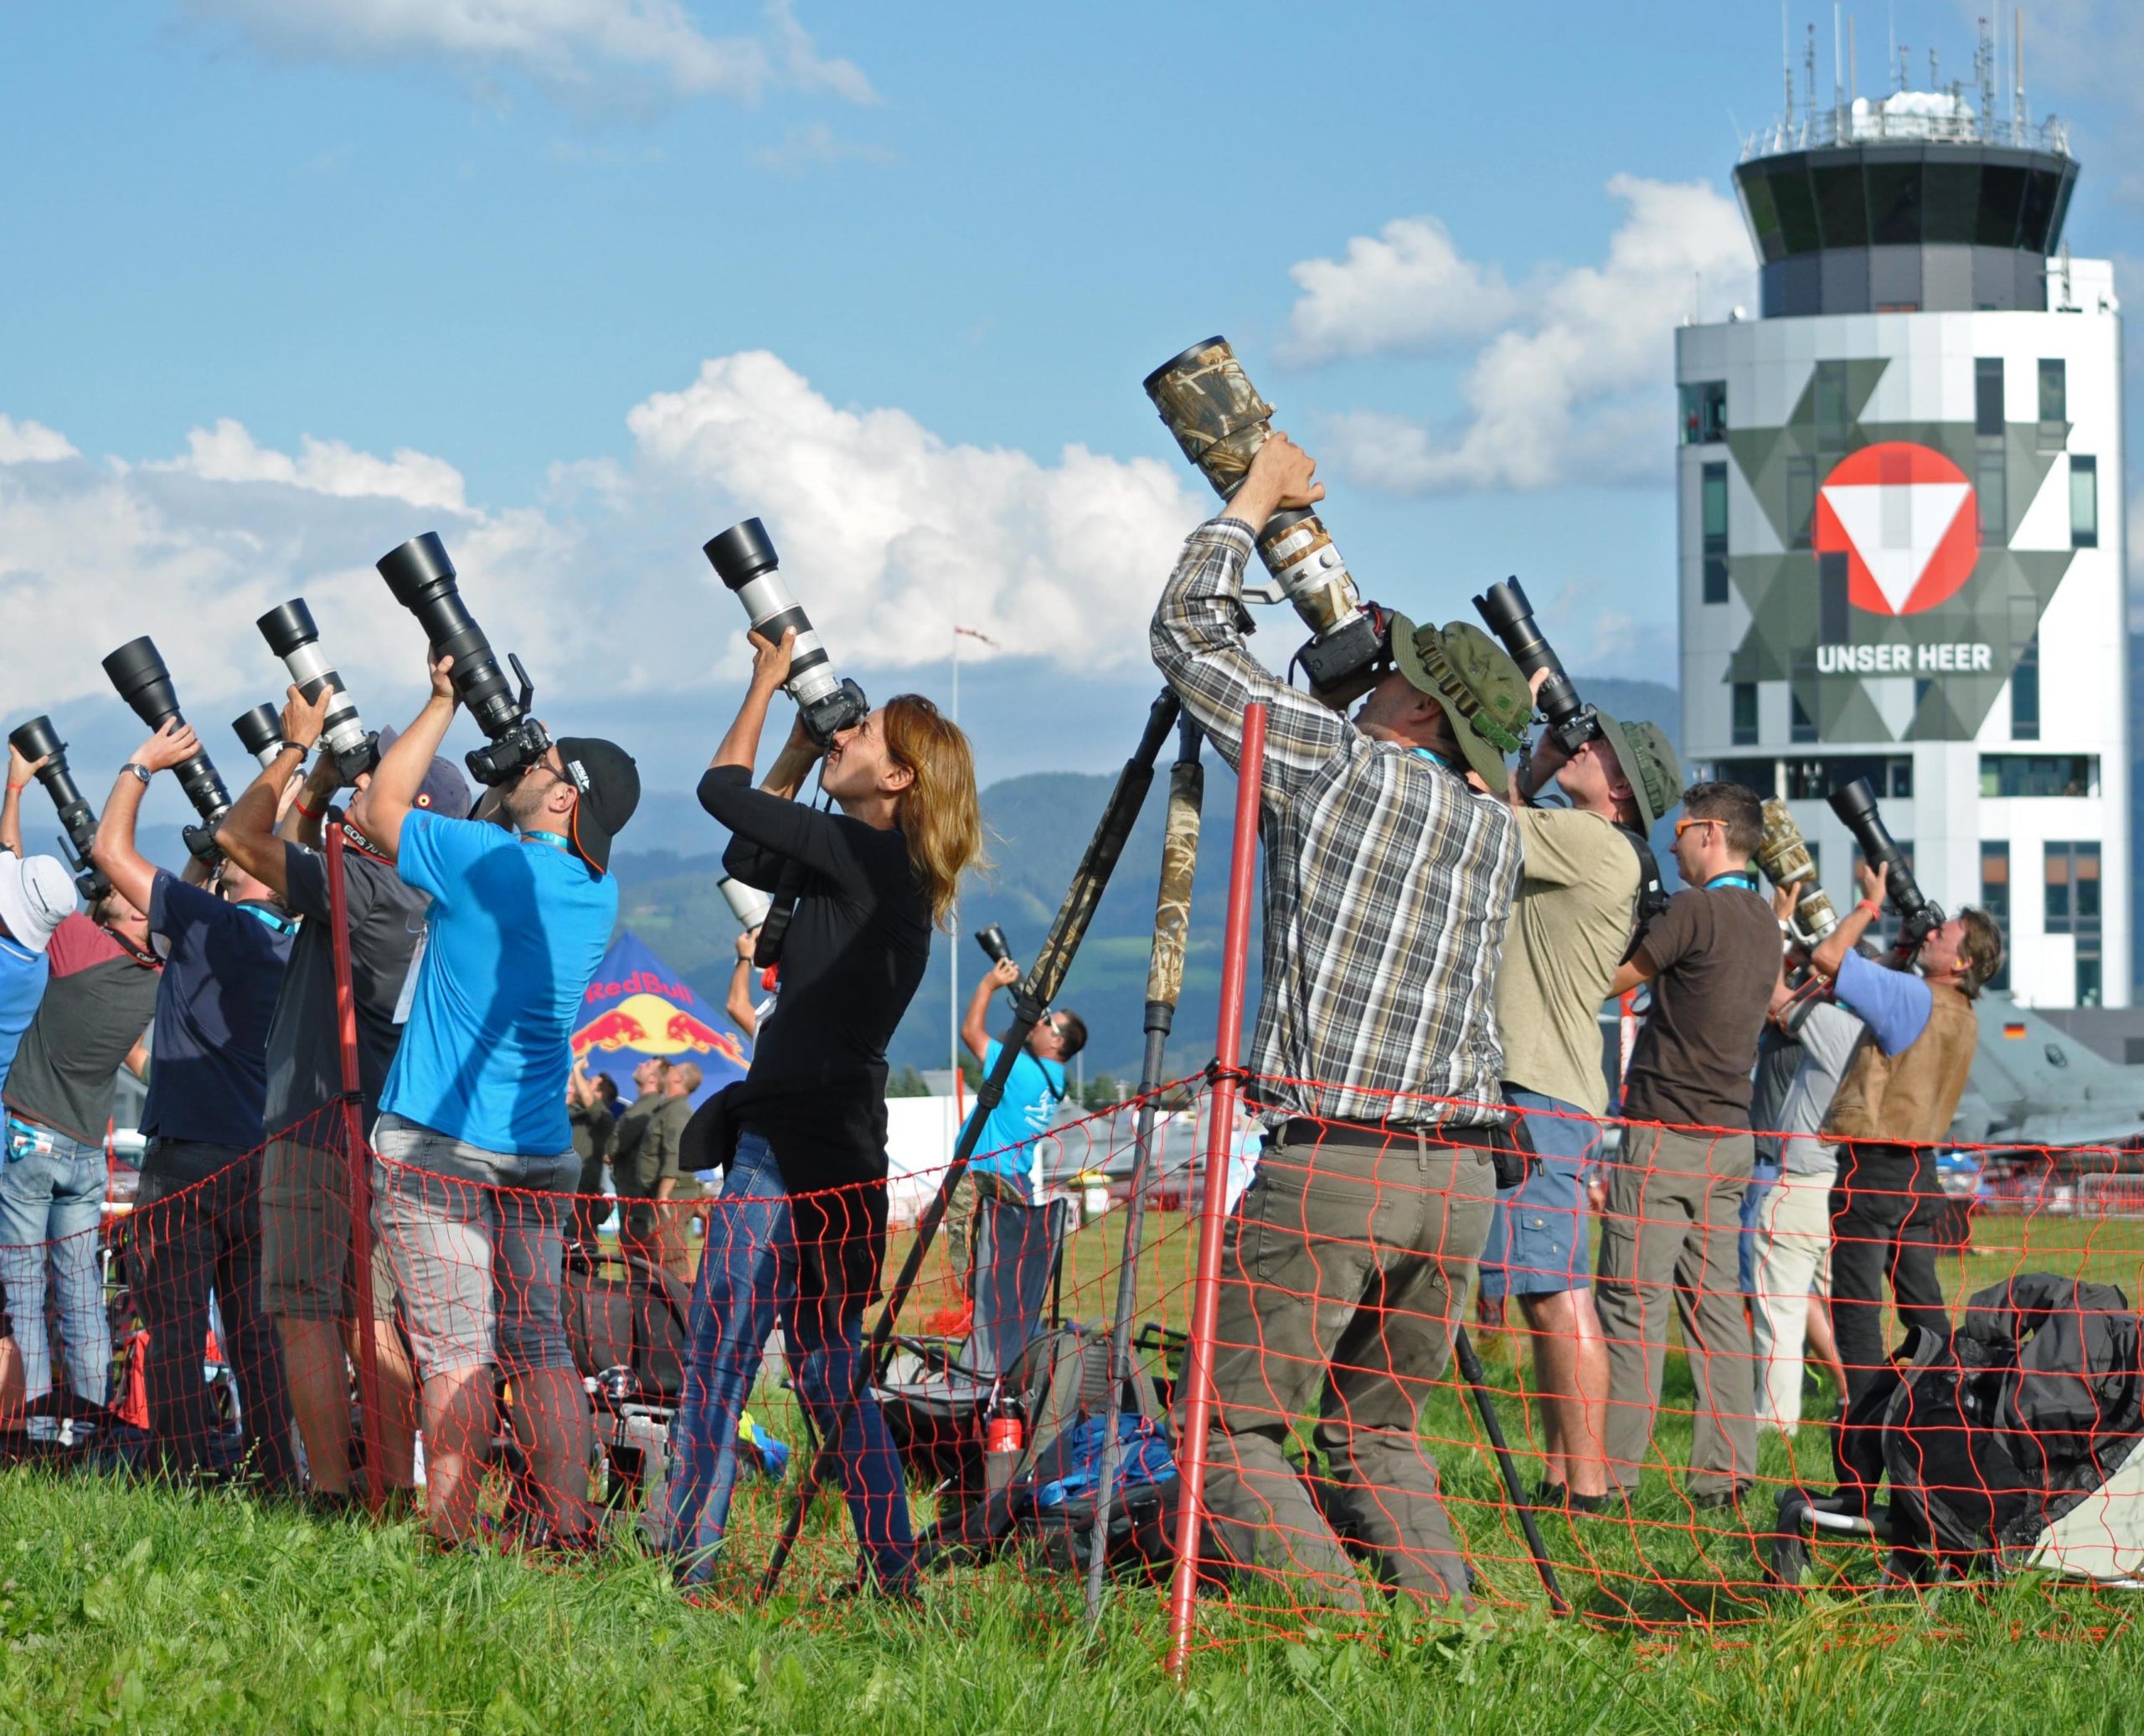 Eine Gruppe von Spottern mit grossen Kameraobjektiven in Richtung Himmel. A group of spotters with large camera lenses pointed towards the sky.